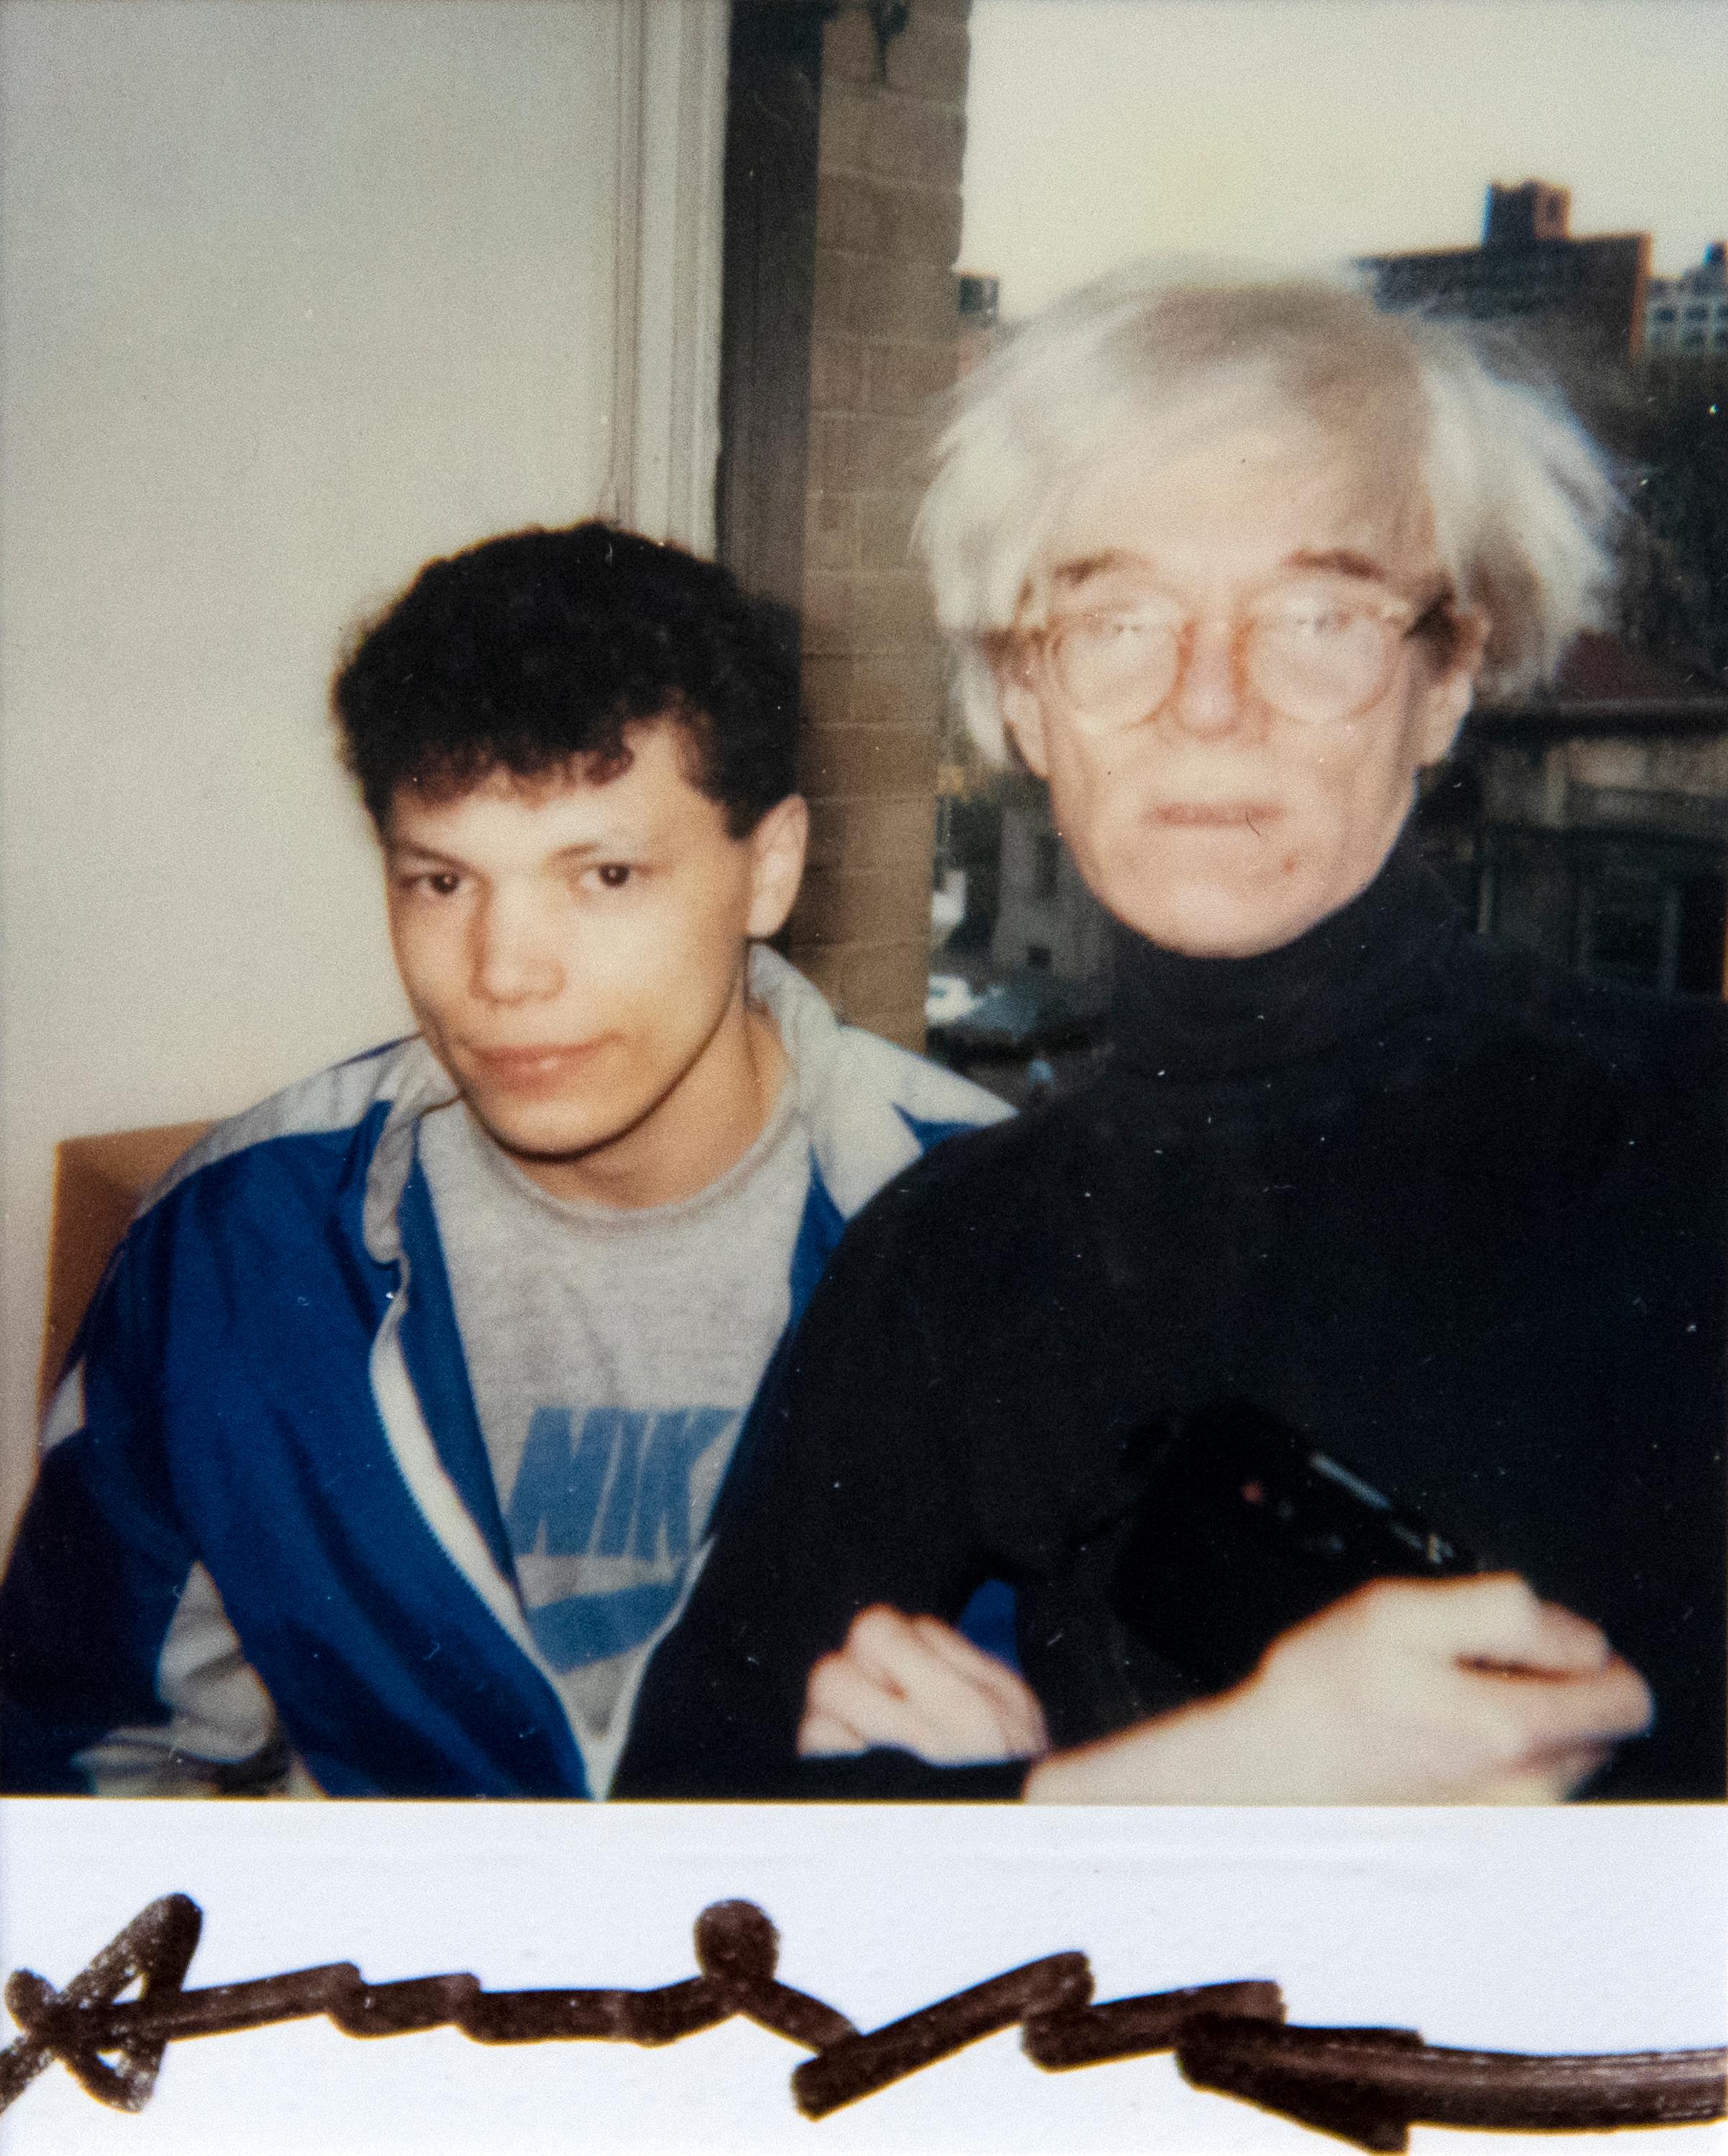 What did Andy Warhol do?